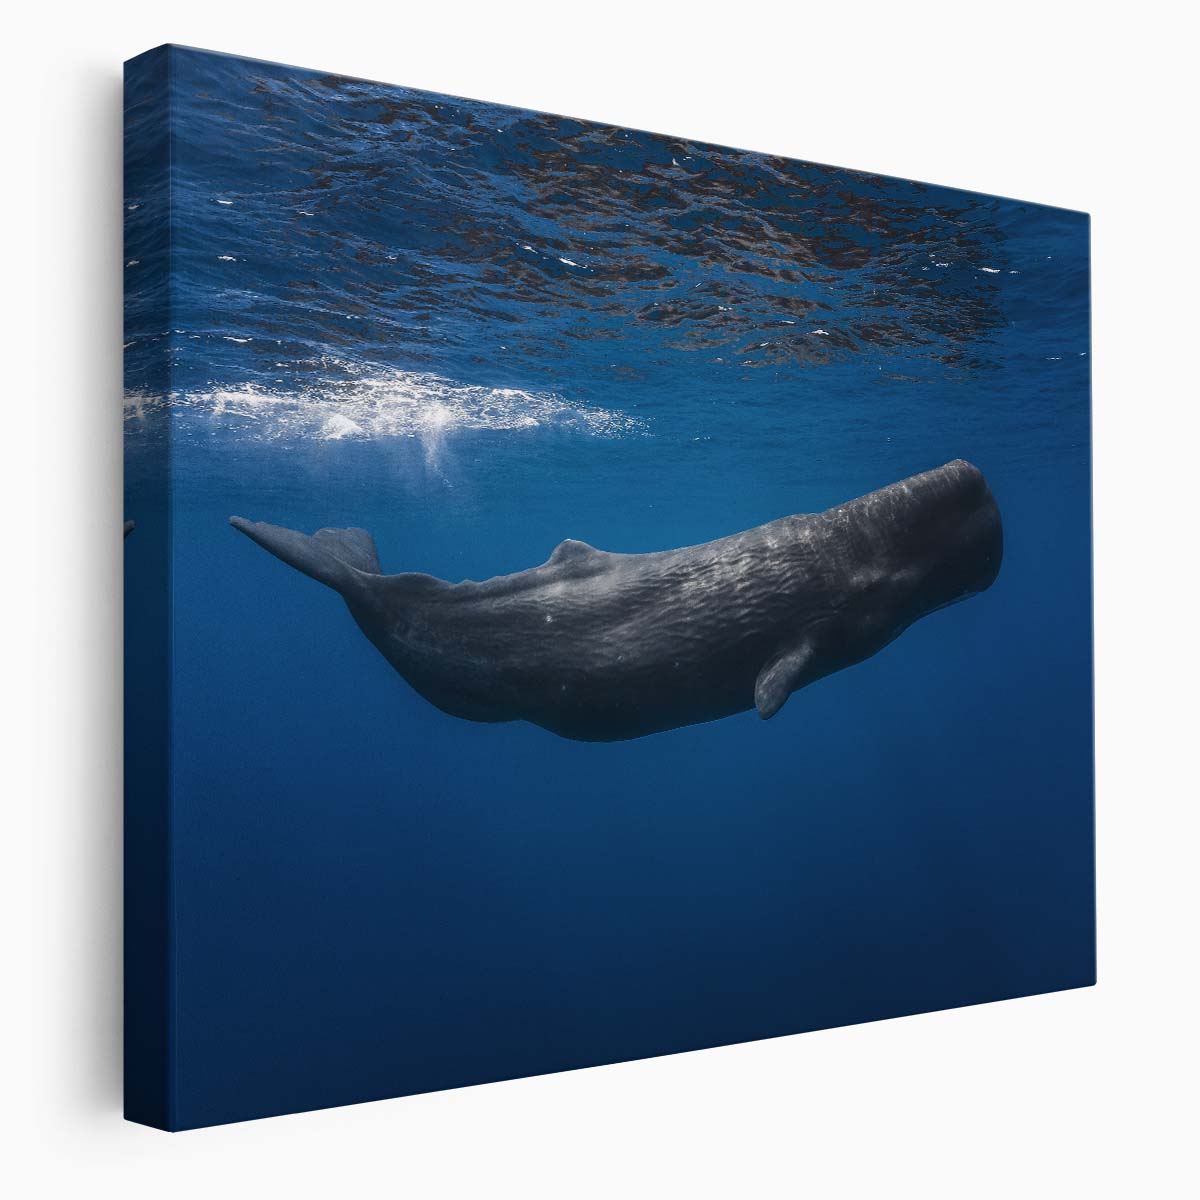 Majestic Sperm Whale Underwater Dive Wall Art by Luxuriance Designs. Made in USA.